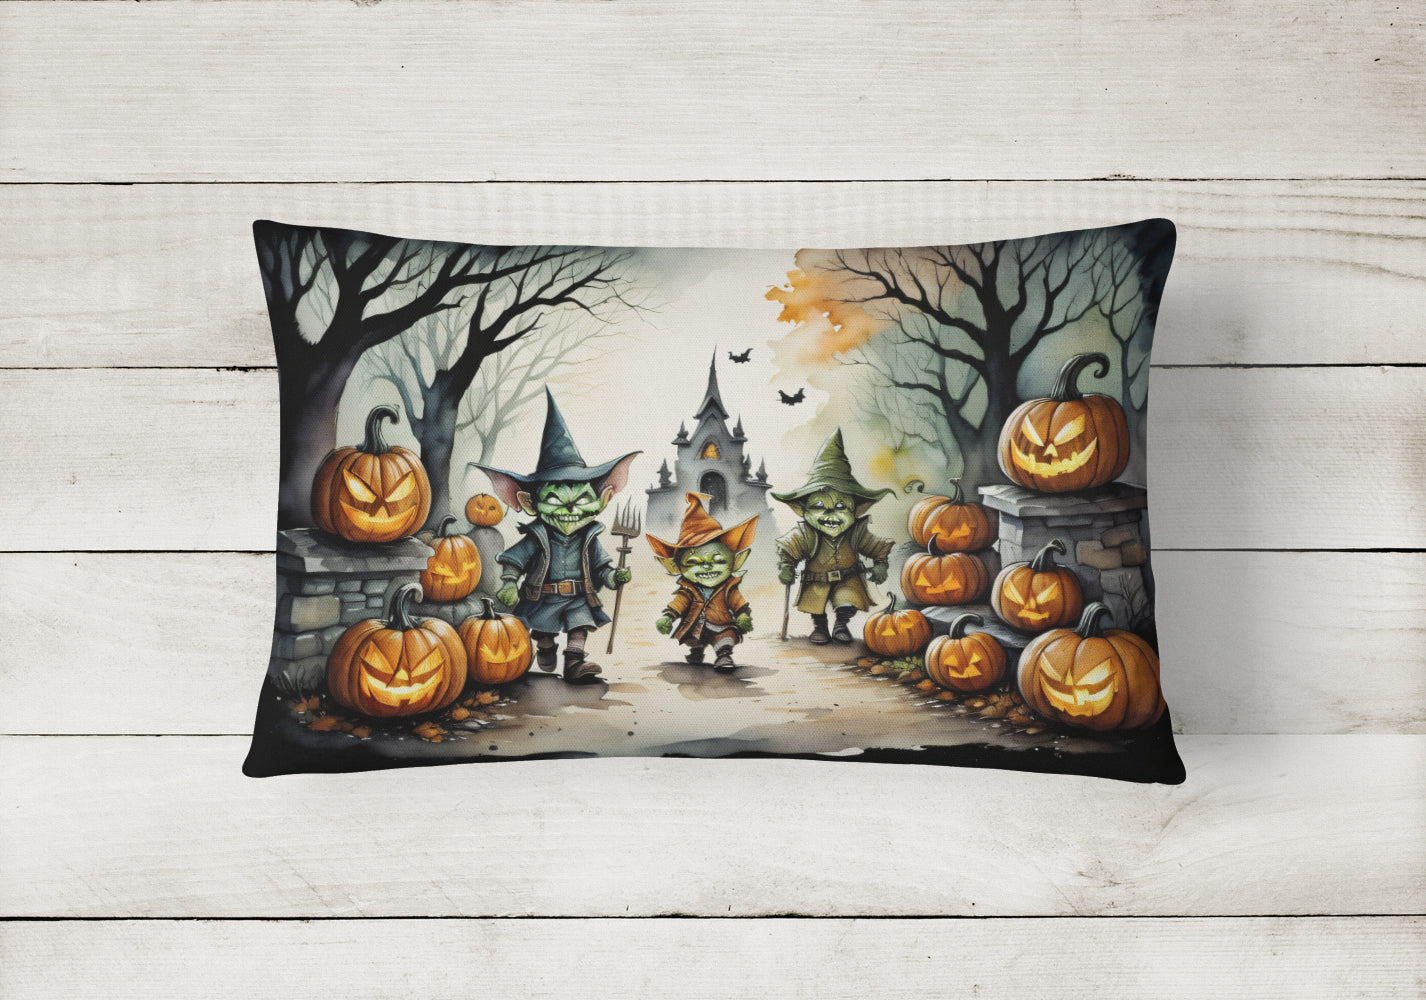 Buy this Goblins Spooky Halloween Fabric Decorative Pillow